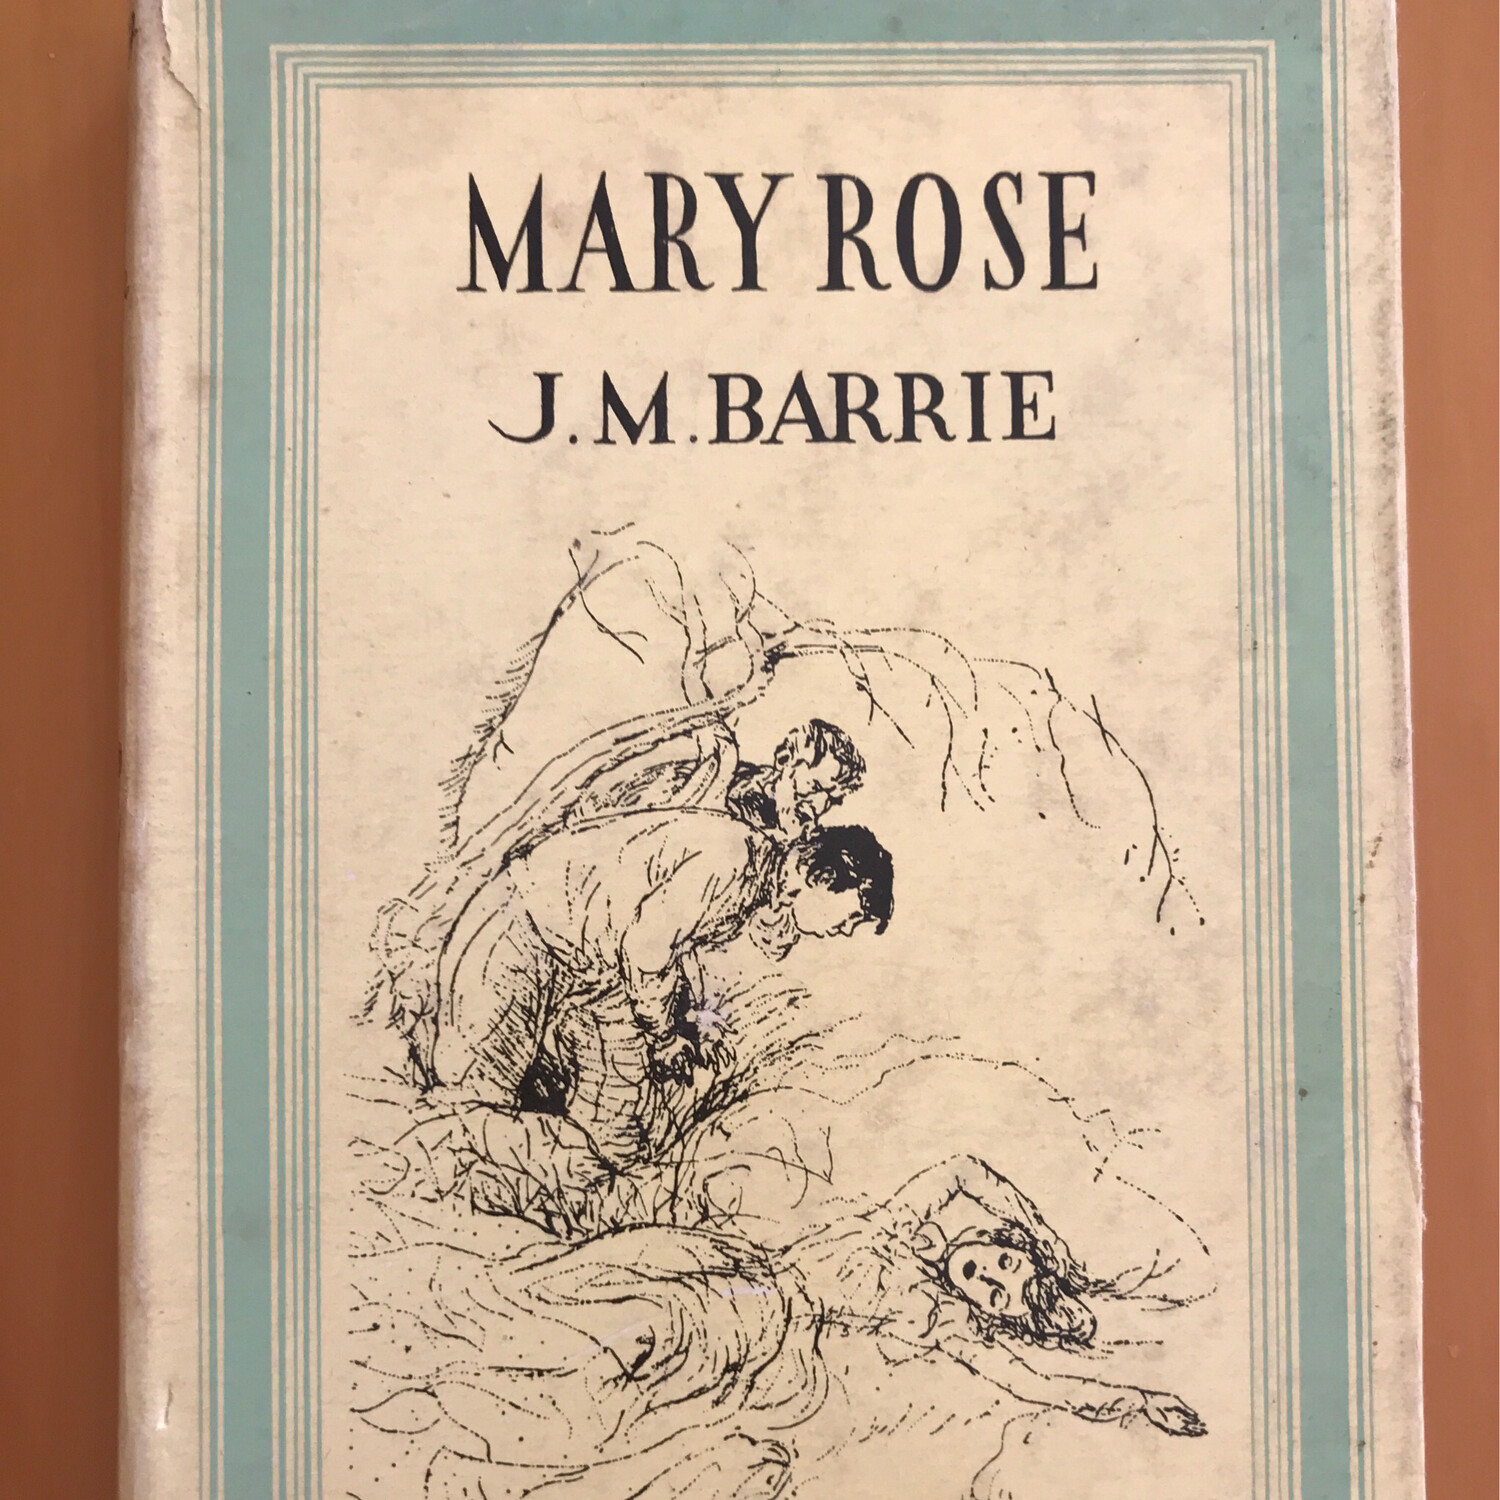 Mary Rose, J. M. Barrie